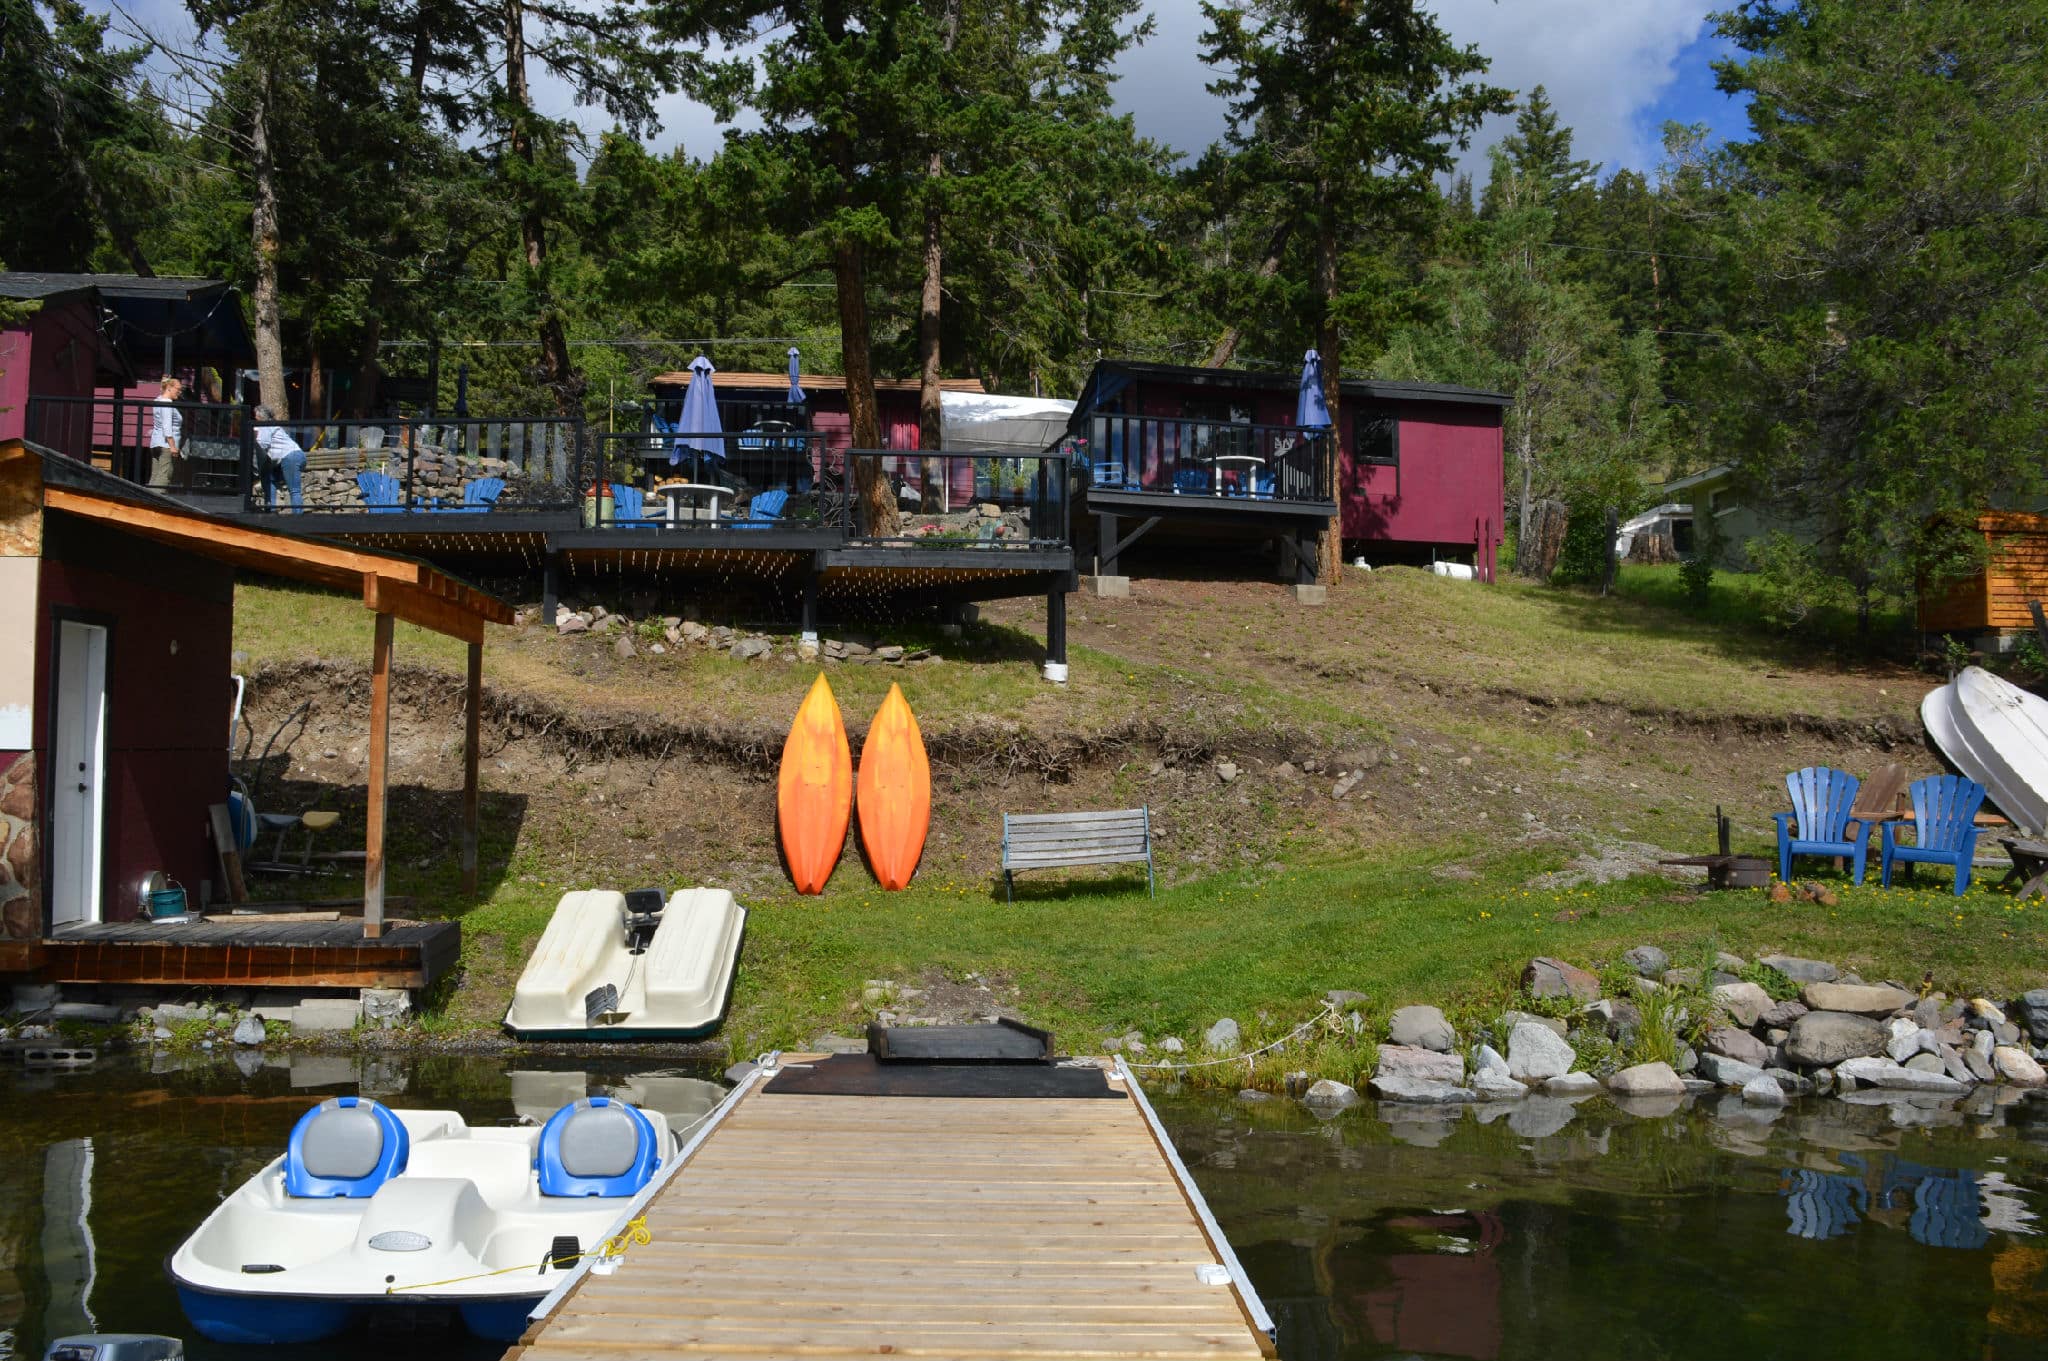 <span  class="uc_style_uc_tiles_grid_image_elementor_uc_items_attribute_title" style="color:#ffffff;">Cabins on the Lake Resort dock view</span>